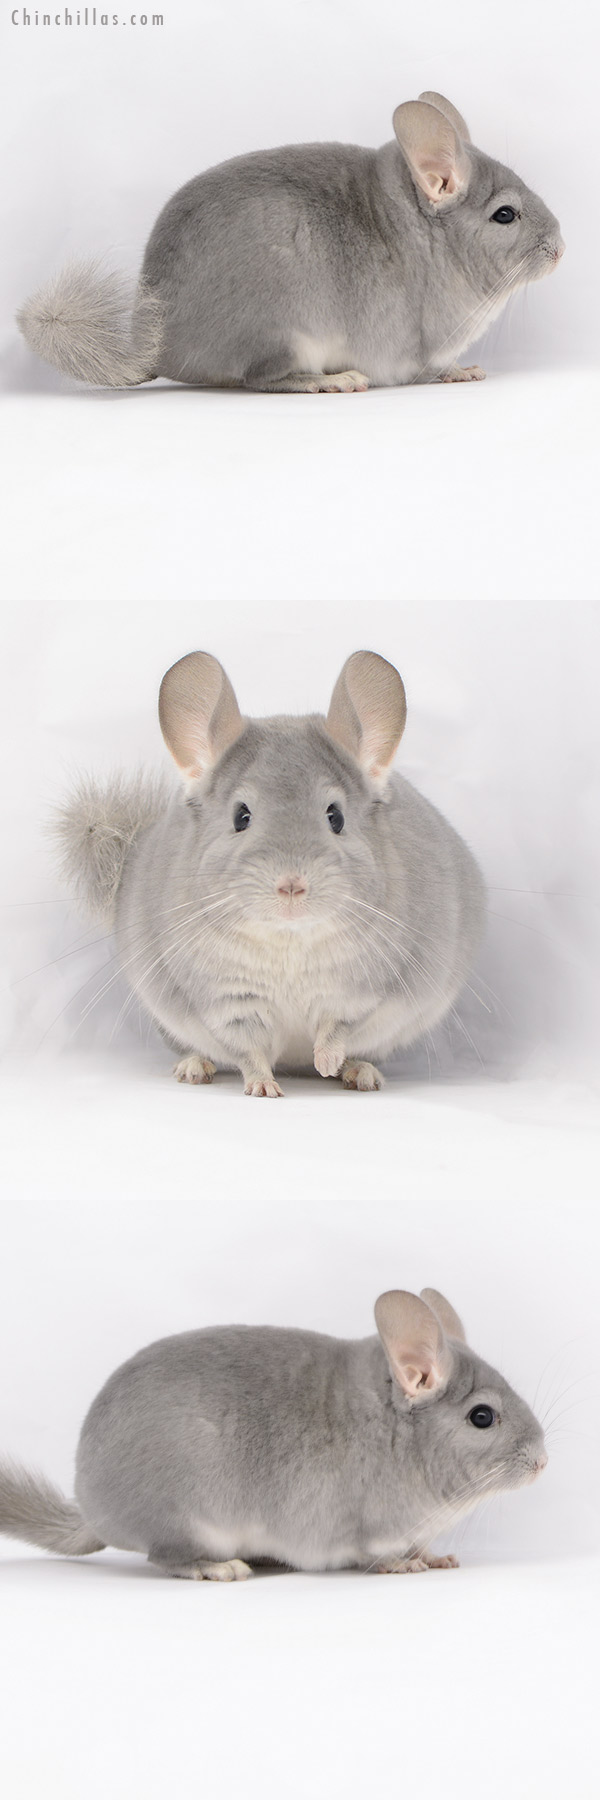 Chinchilla or related item offered for sale or export on Chinchillas.com - 20213 Premium Production Quality Blue Diamond Female Chinchilla